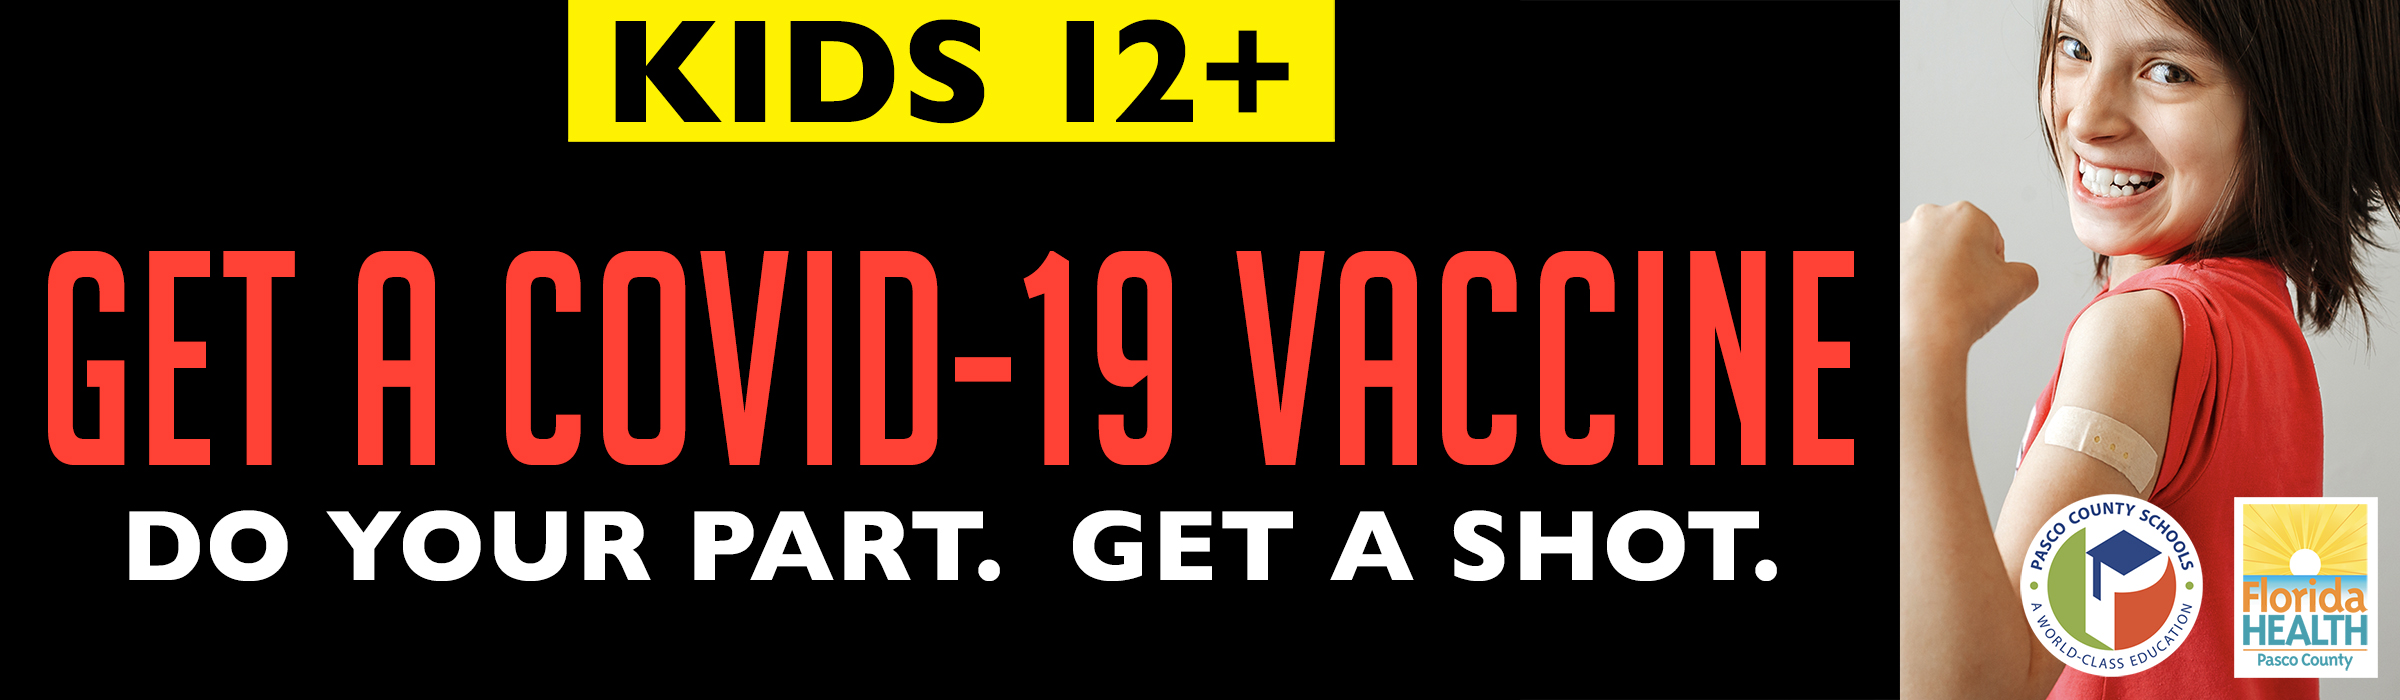 Kids 12+ get a covid-19 vaccine.  Do your part. Get a shot